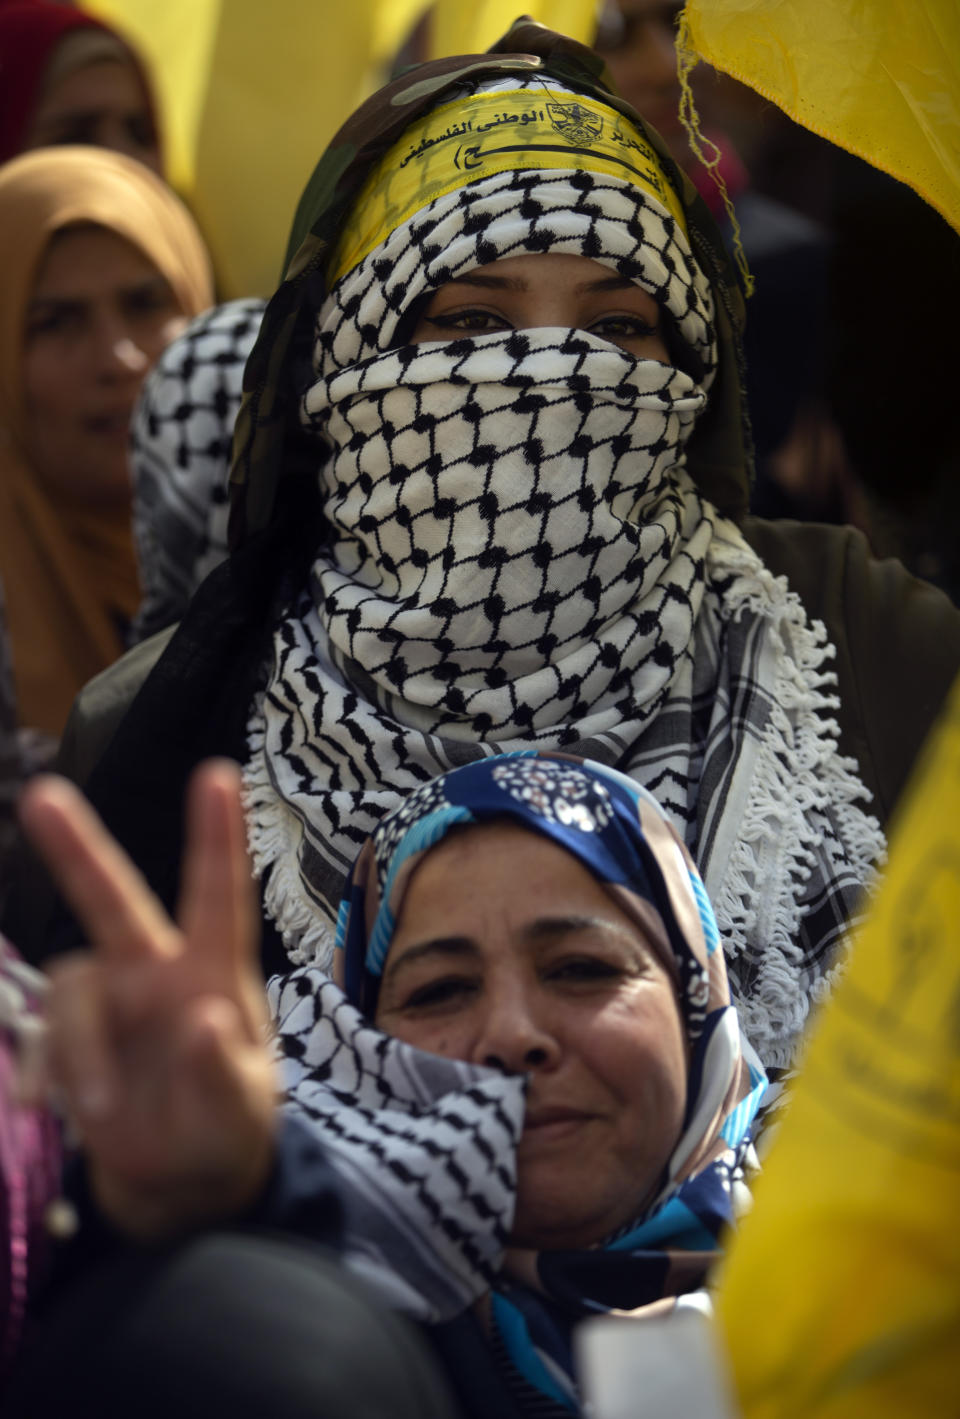 Palestinian women celebrate during a rally marking the 55th anniversary of the Fatah movement founding, in Gaza City, Wednesday, Jan. 1, 2020. Fatah is a secular Palestinian party and former guerrilla movement founded by the late Palestinian leader Yasser Arafat, in Gaza City, Wednesday, Jan. 1, 2020. (AP Photo/Khalil Hamra)